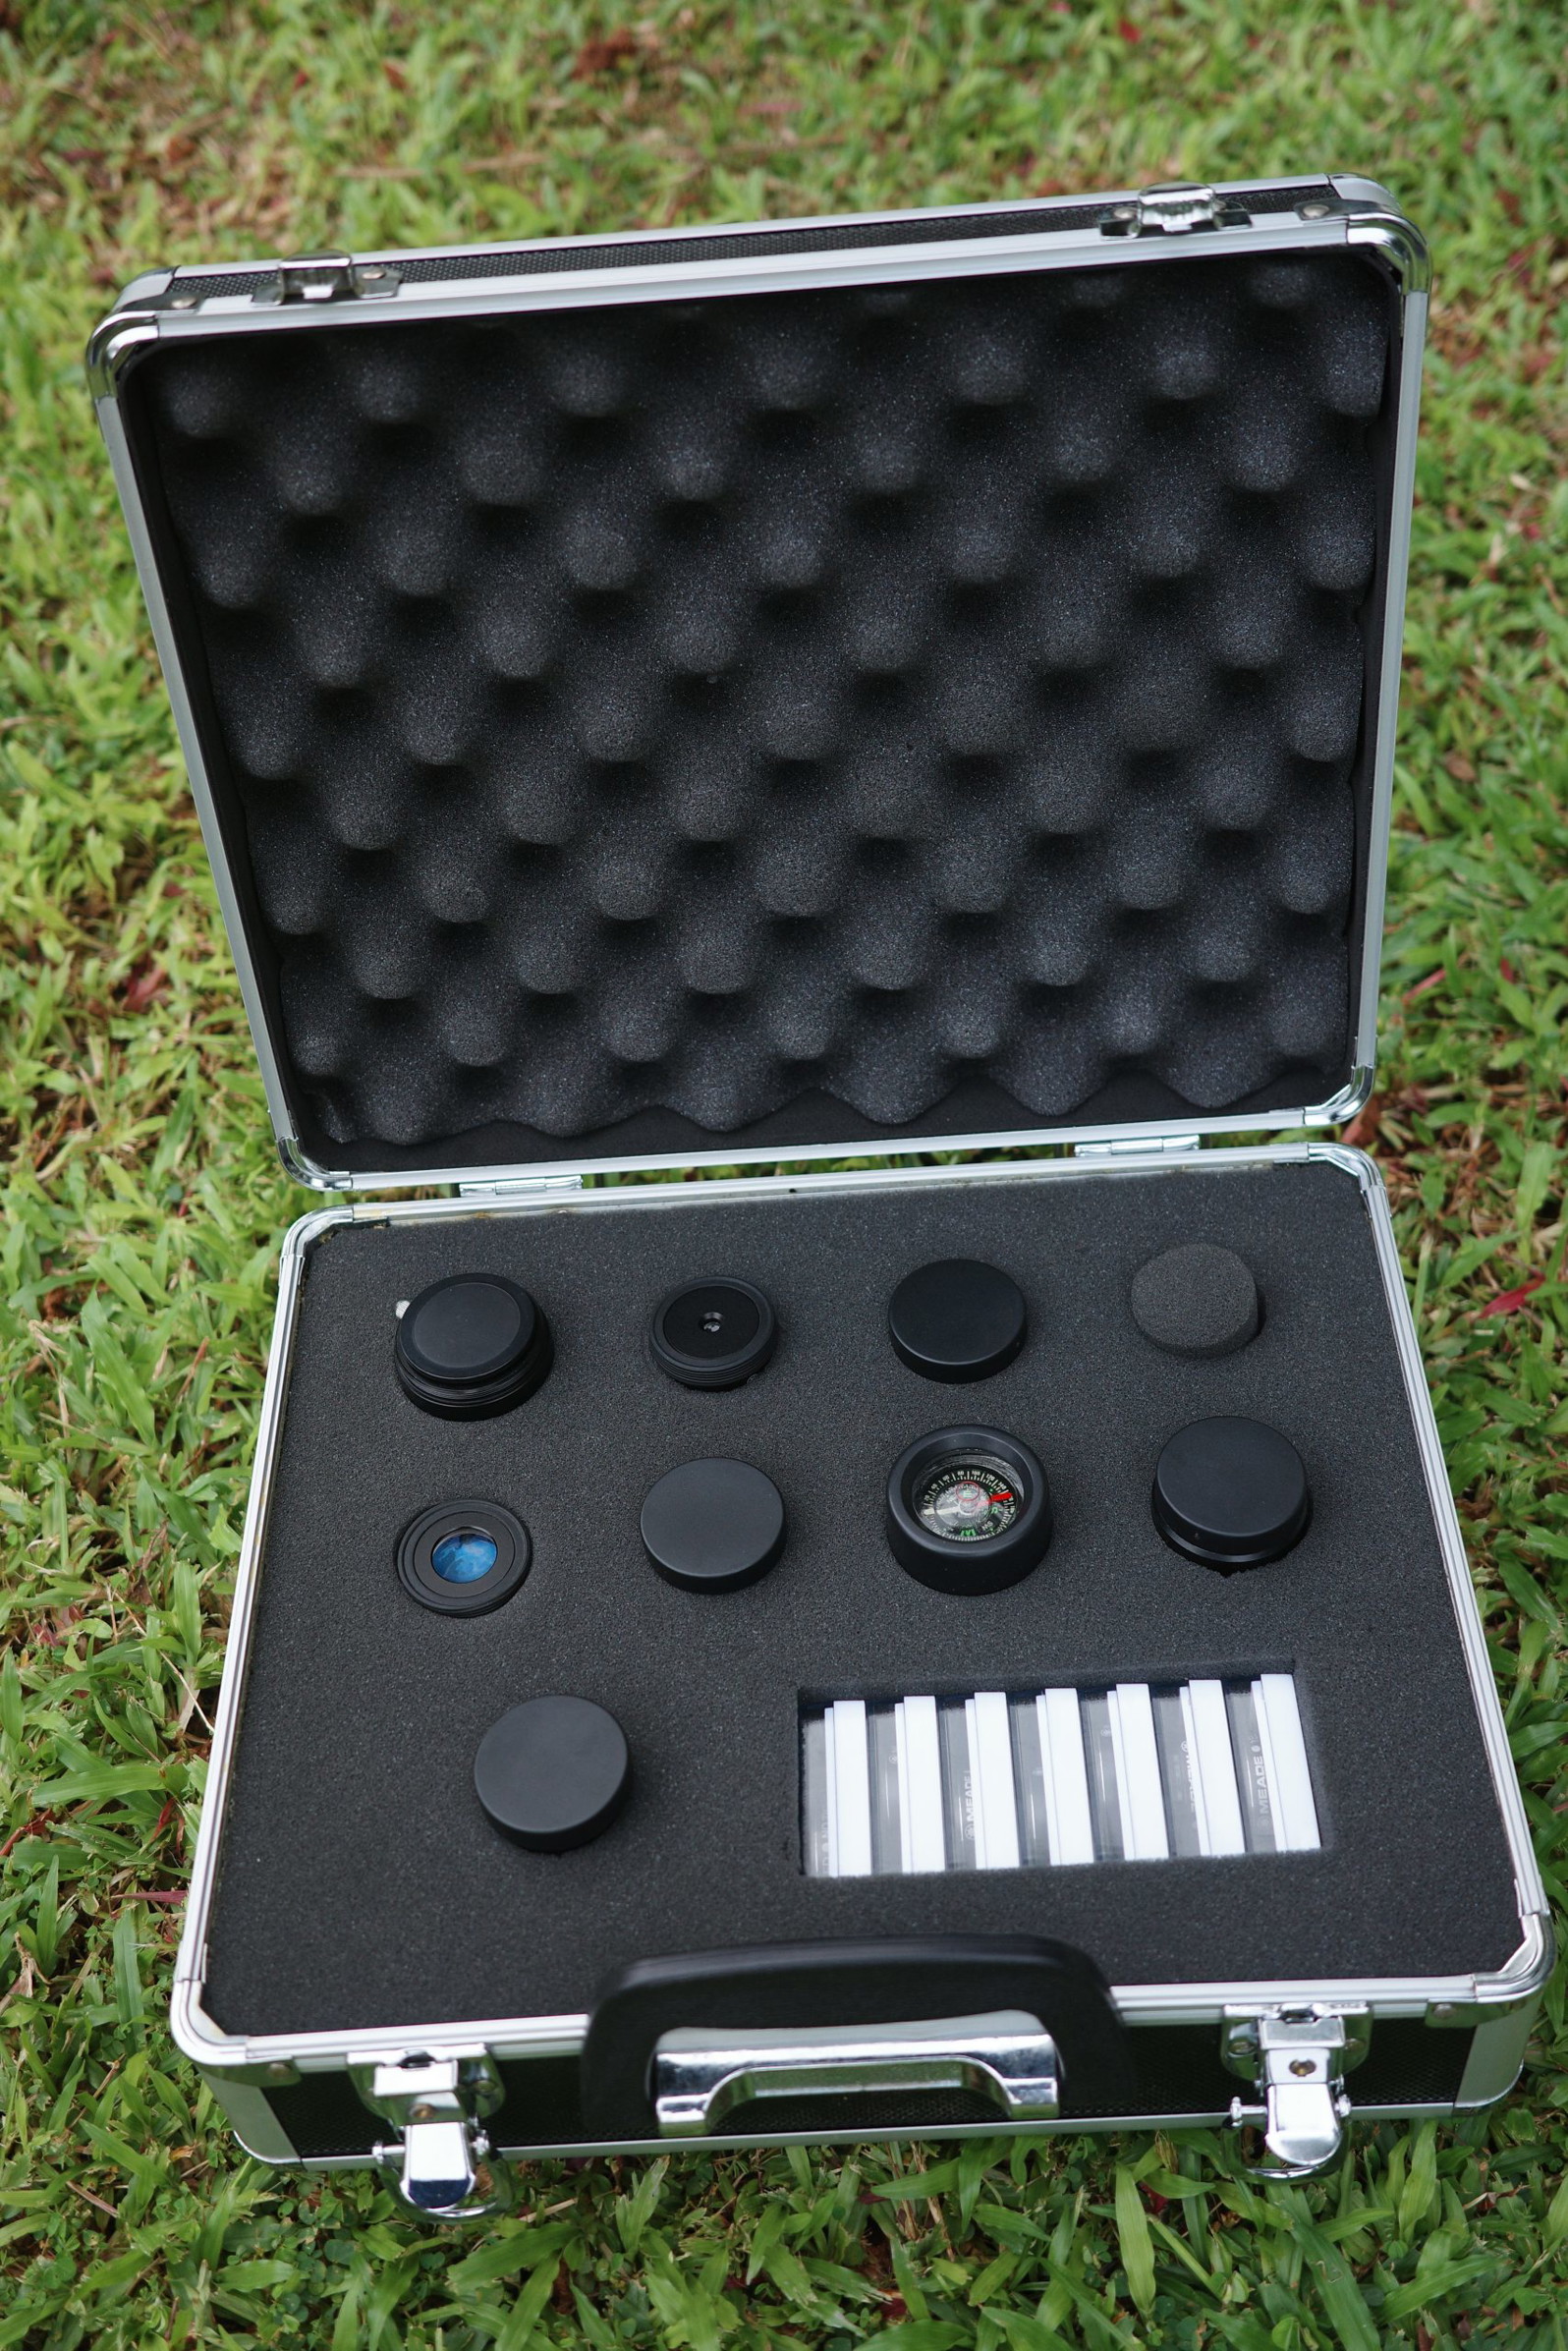 Eyepieces in a case it came with